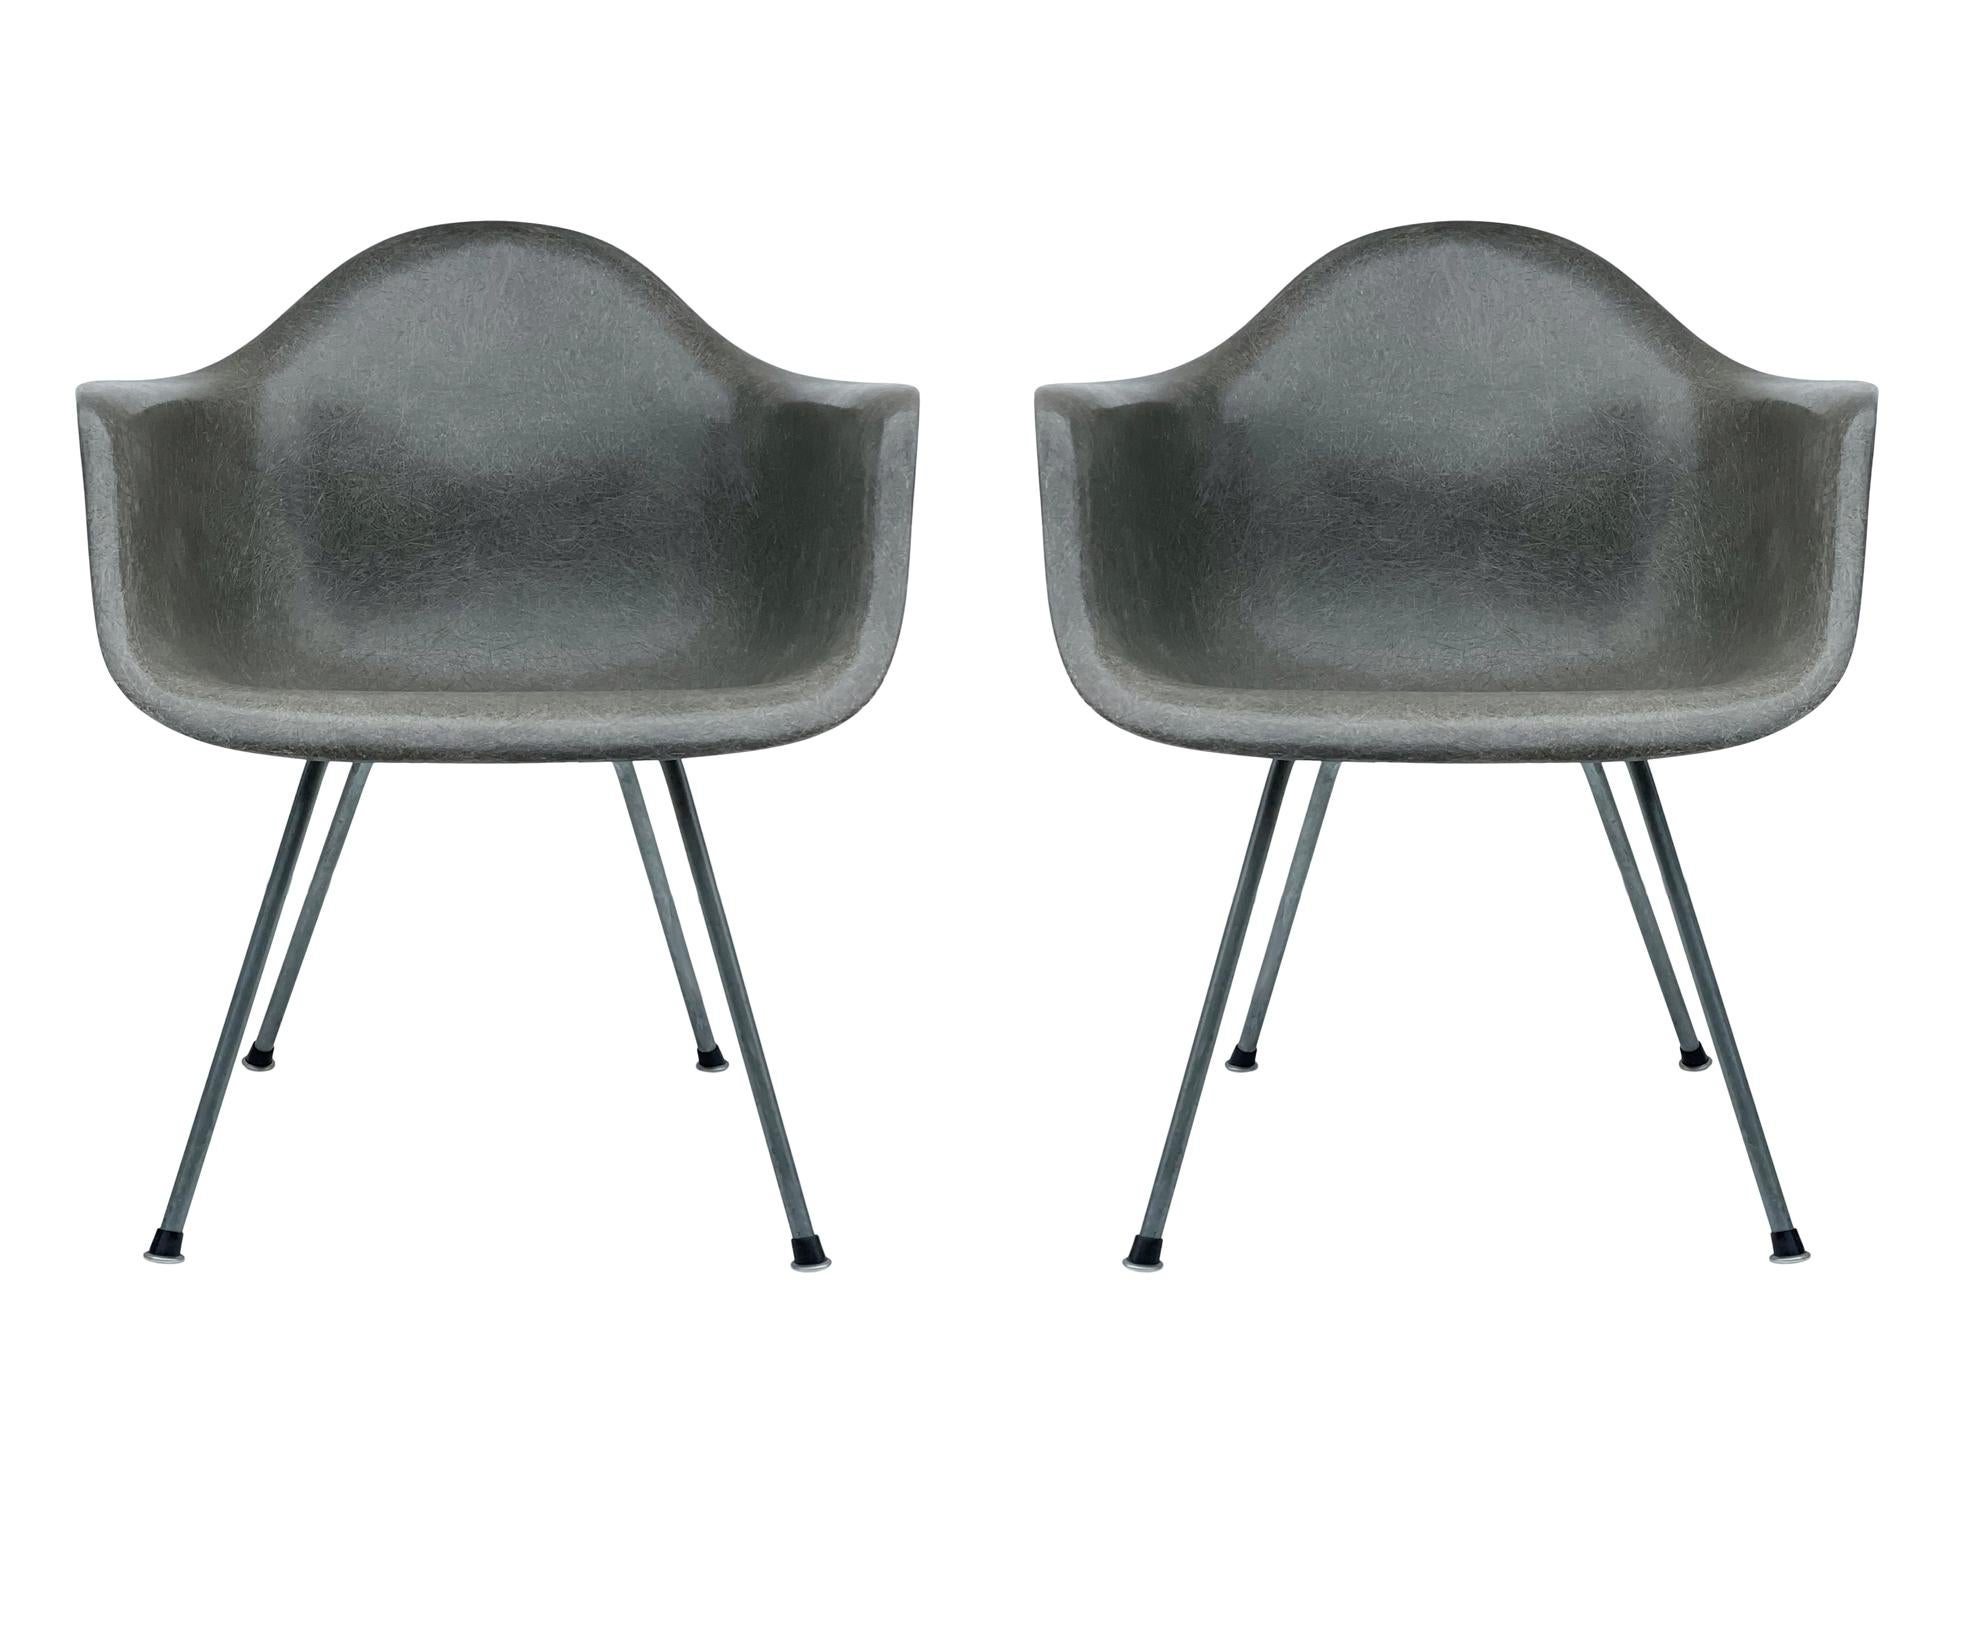 Mid-20th Century Pair of Early 2nd Generation Eames Fiberglass LAX Lounge Chairs in Elephant Gray For Sale